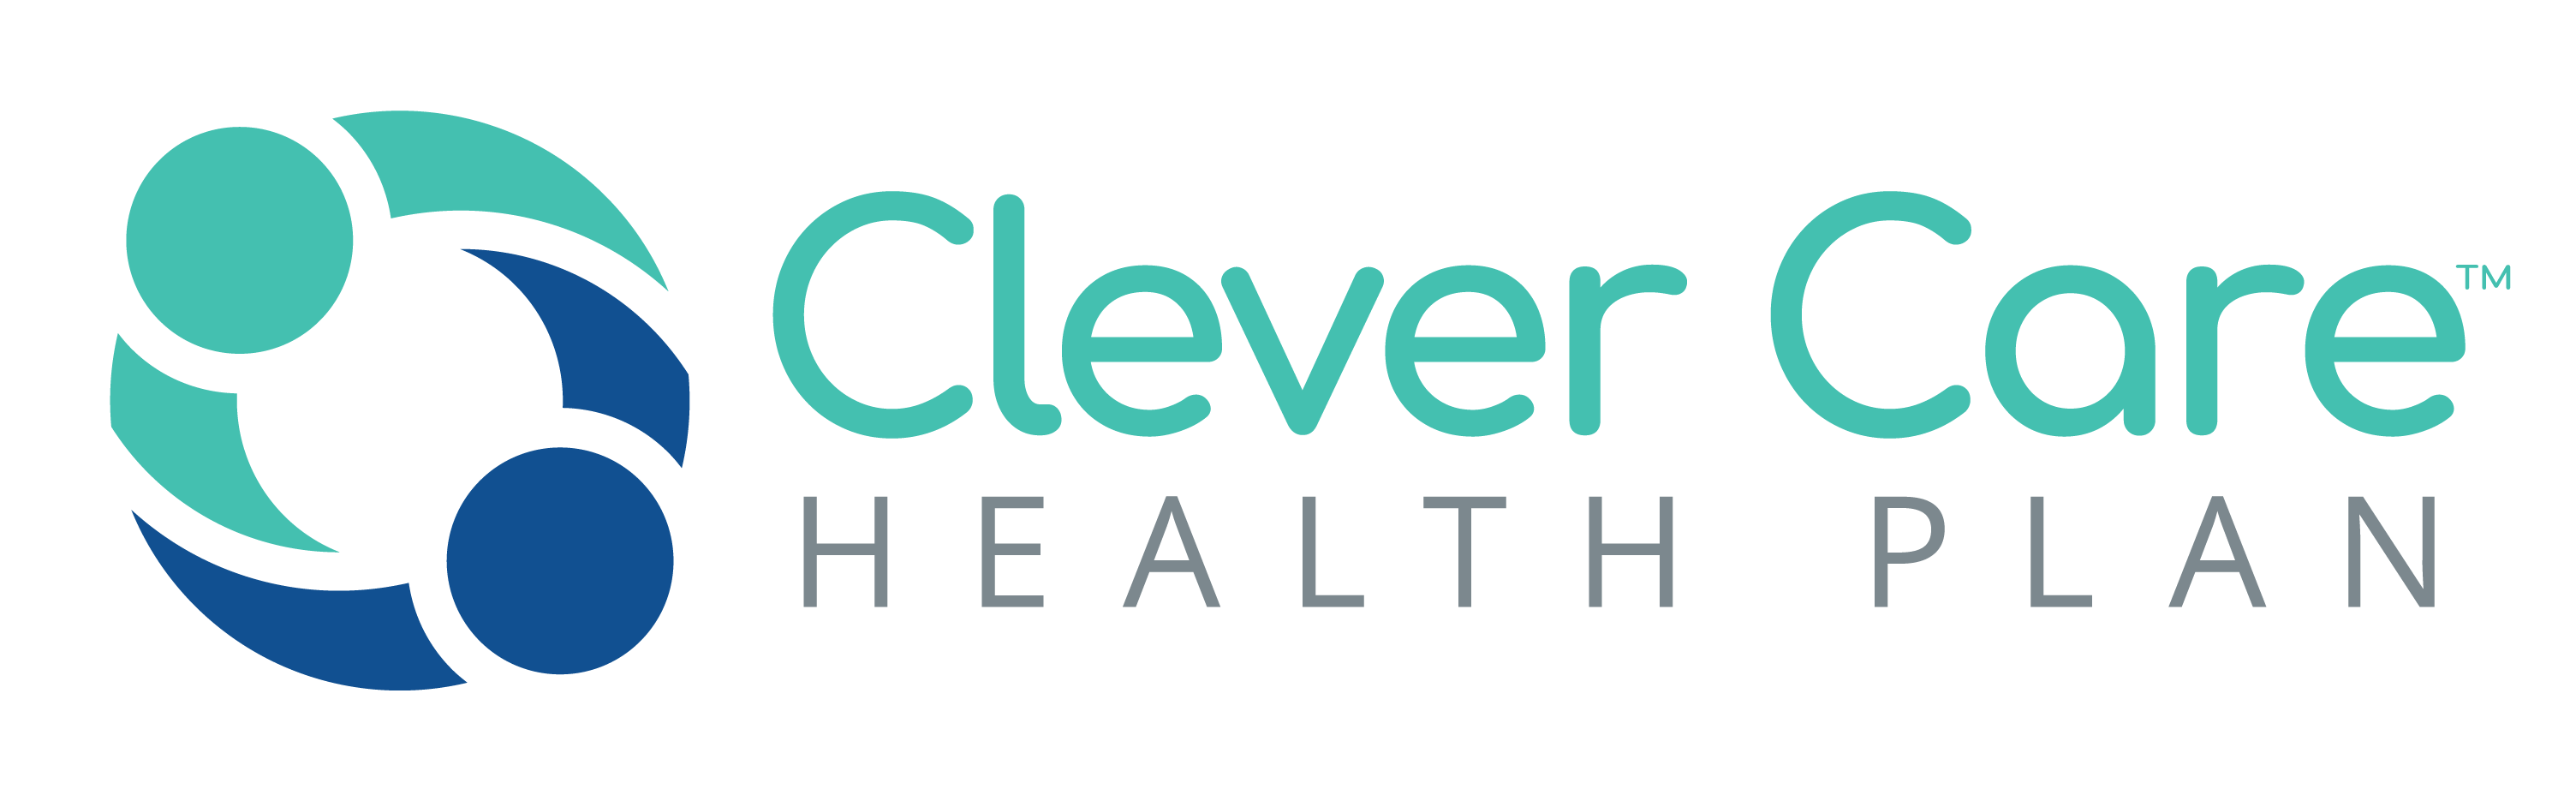 Clever-Care_logo_H